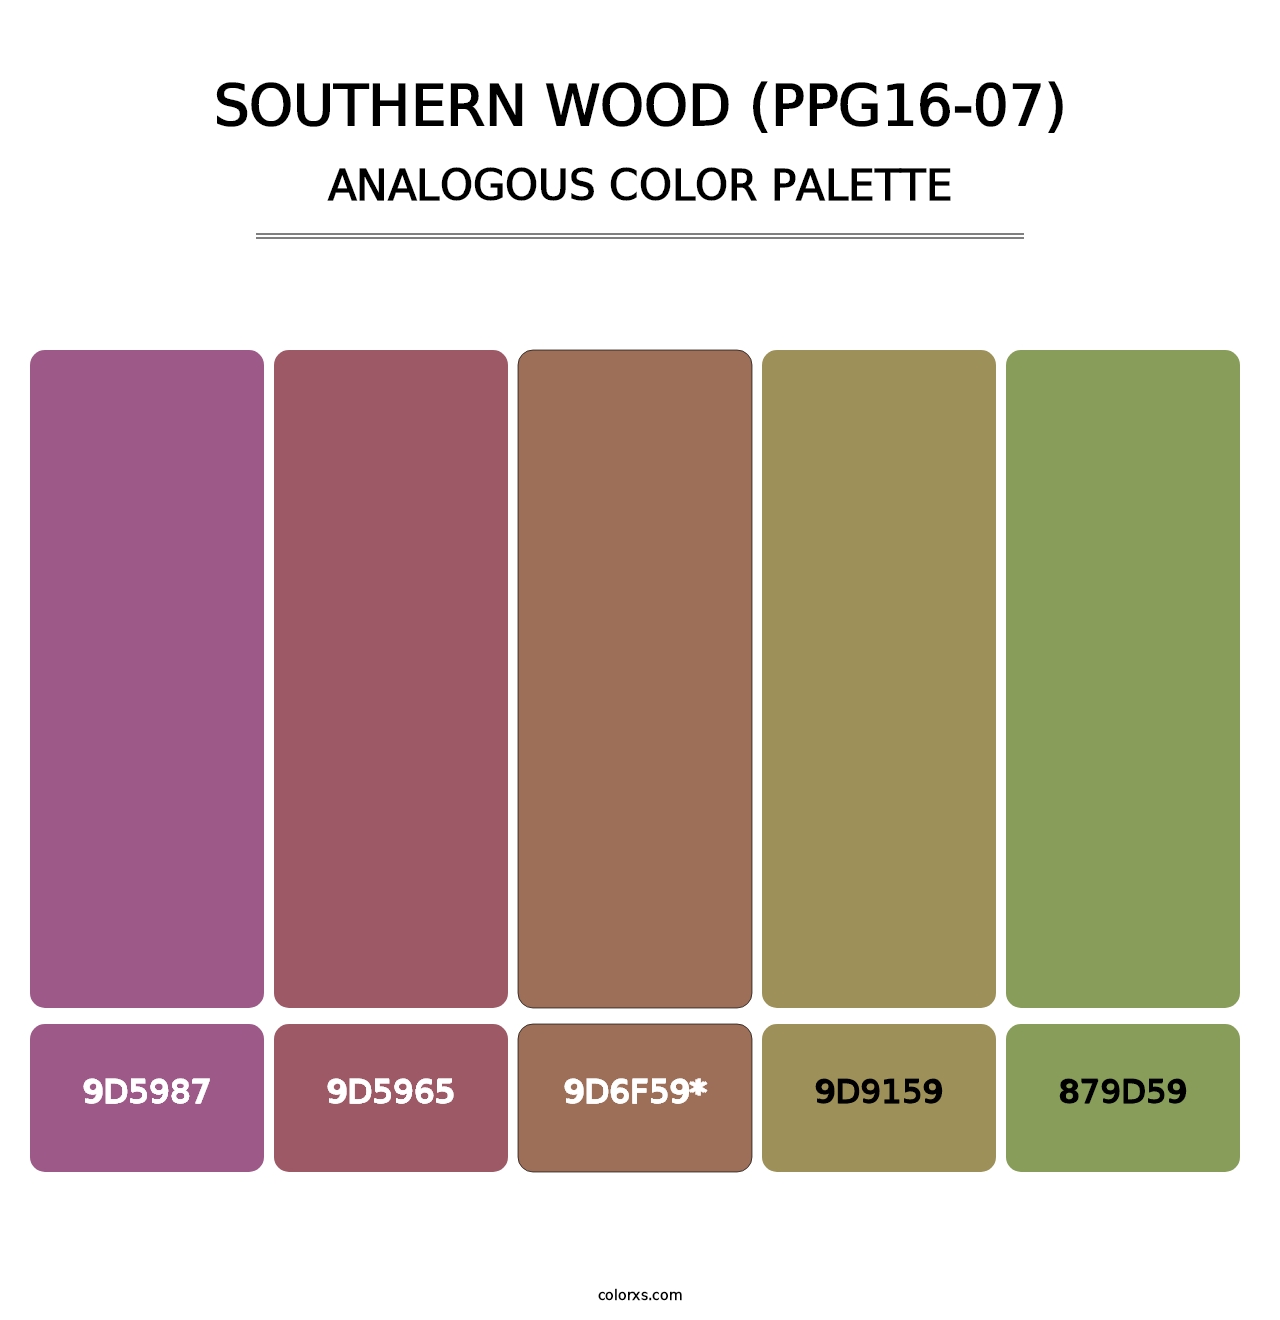 Southern Wood (PPG16-07) - Analogous Color Palette